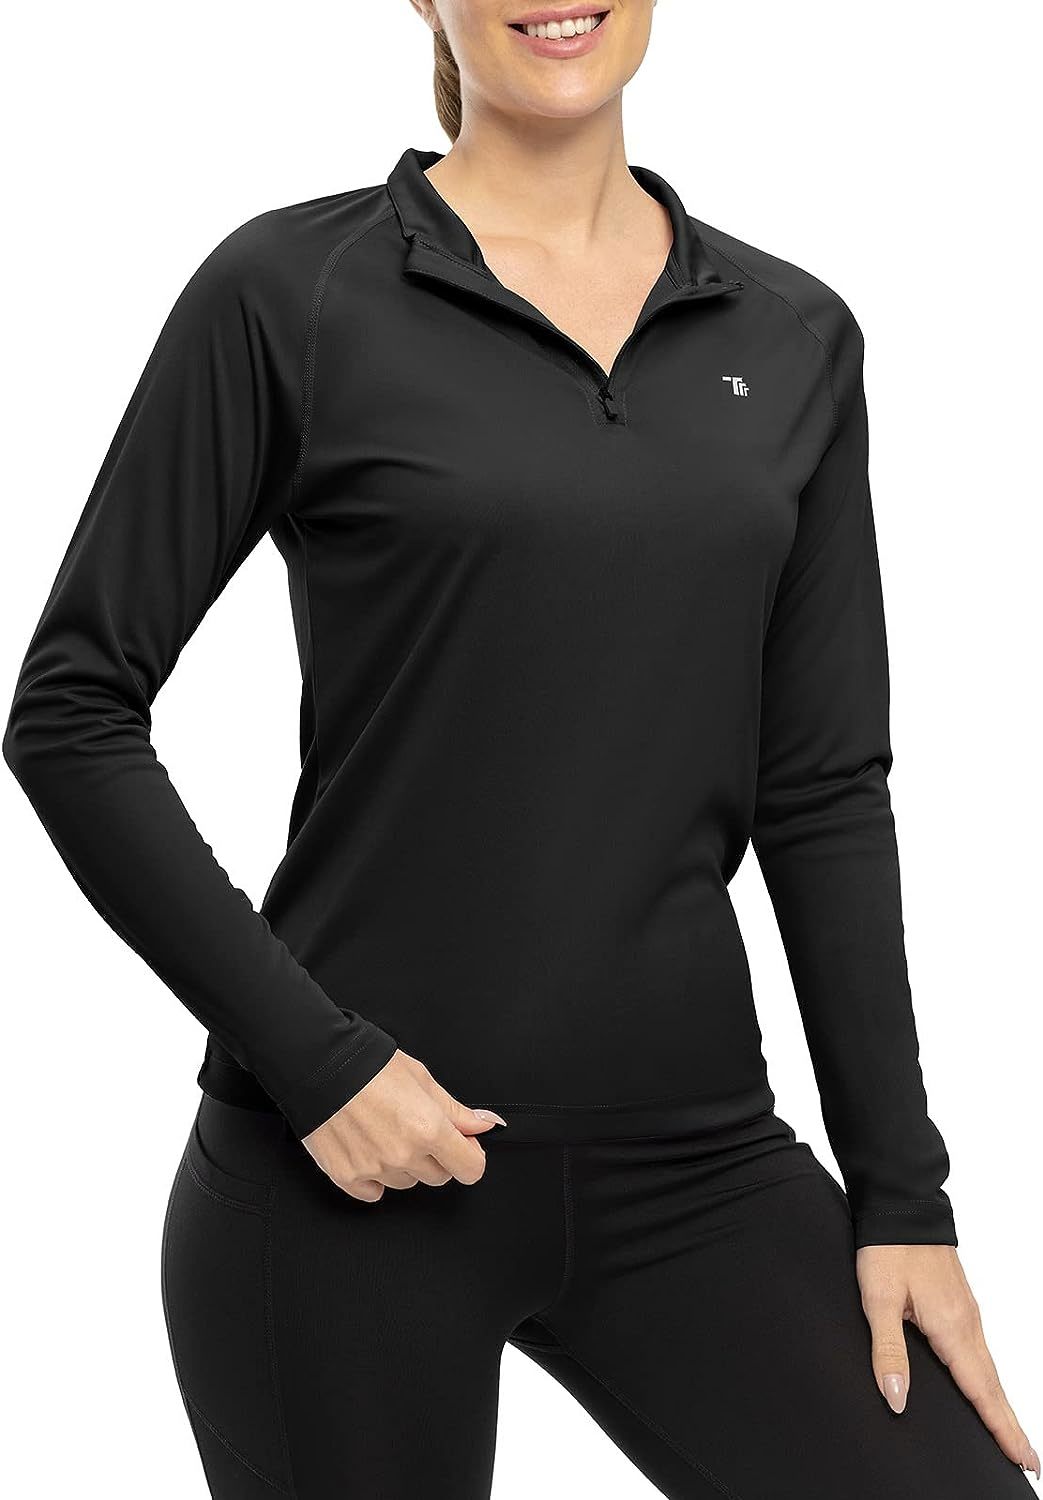 Primary image for Women'S Rdruko Hiking Shirts With Long Sleeves, Quick Drying Quarter-Zips, And